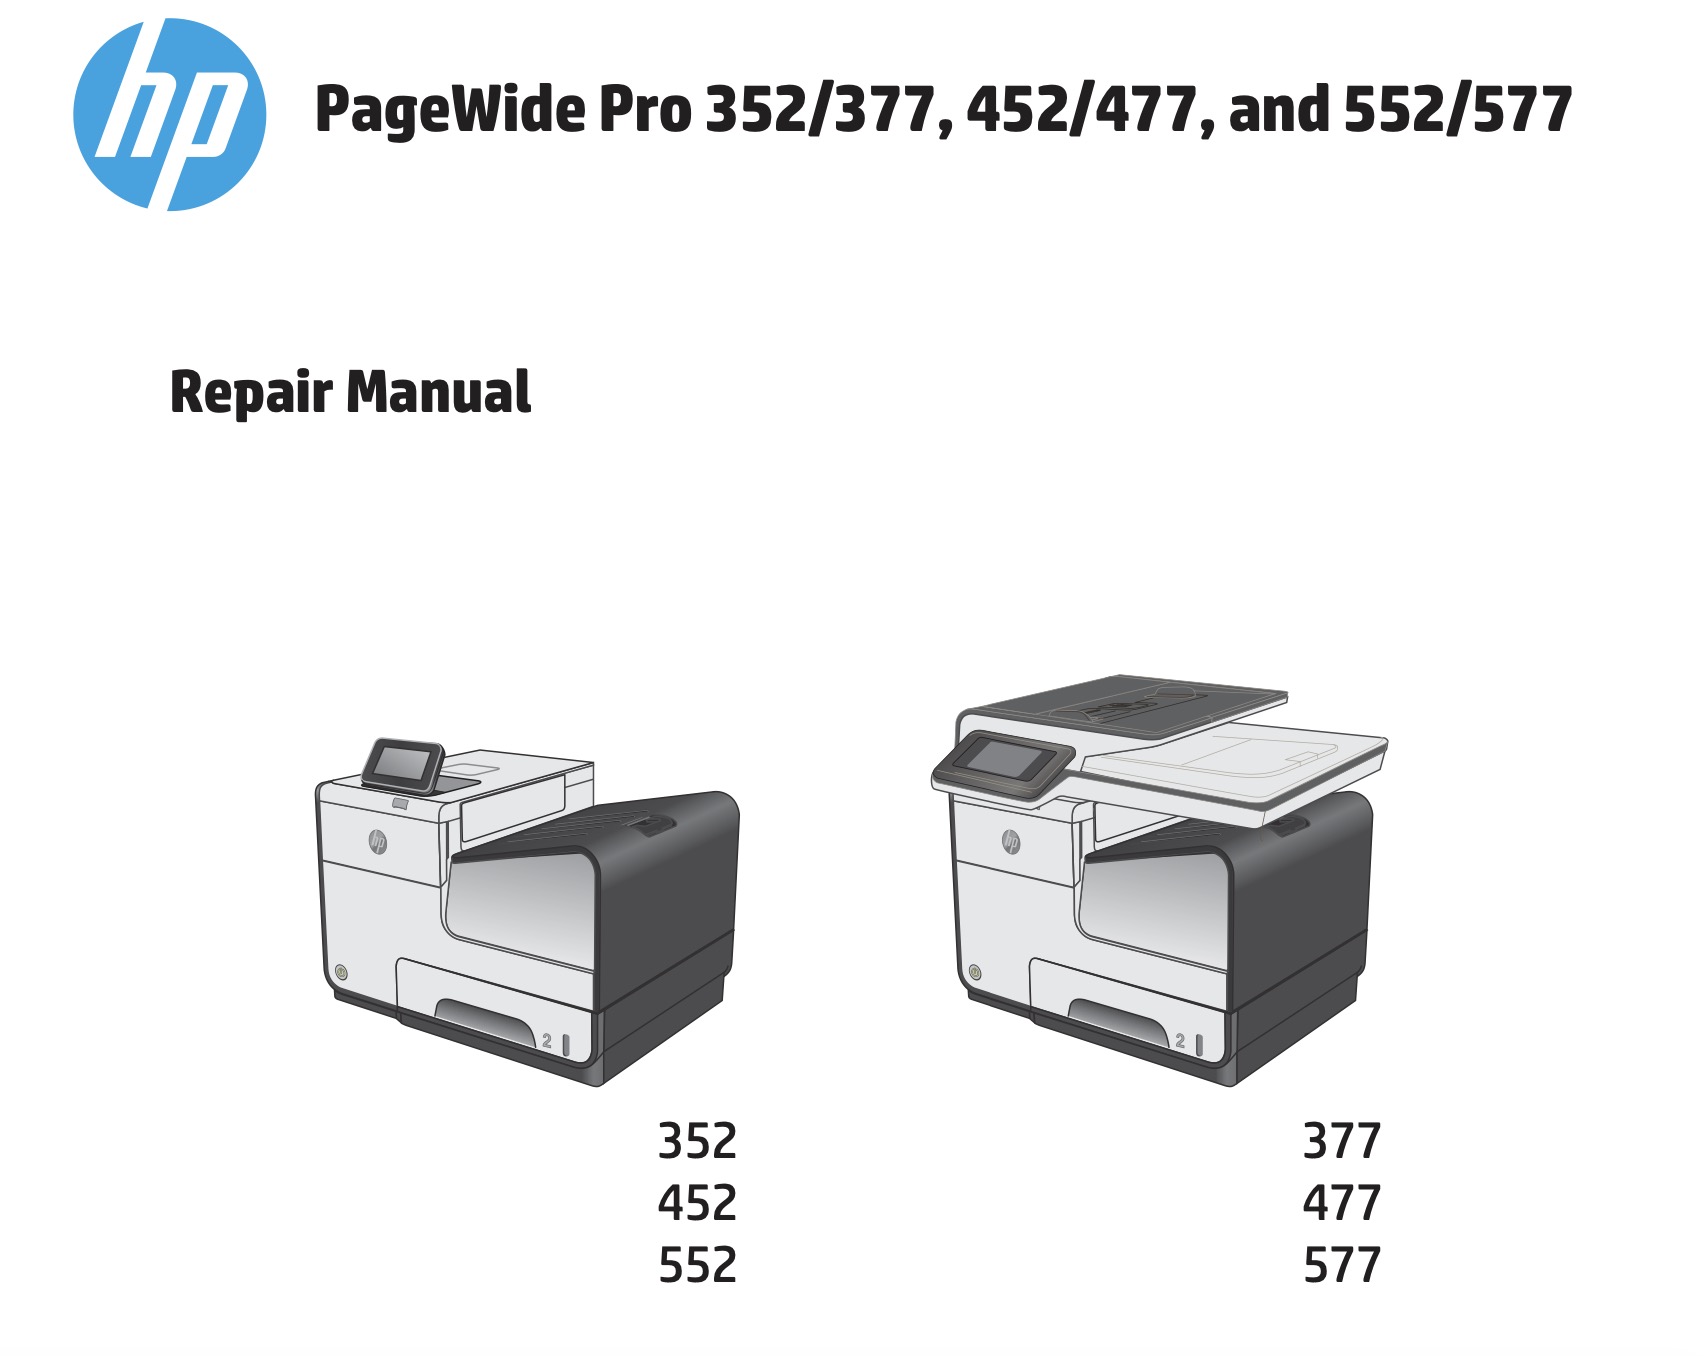 HP PageWide Pro 352/377, 452/477, and 552/577 Service Repair Manual,  Parts List and Diagrams